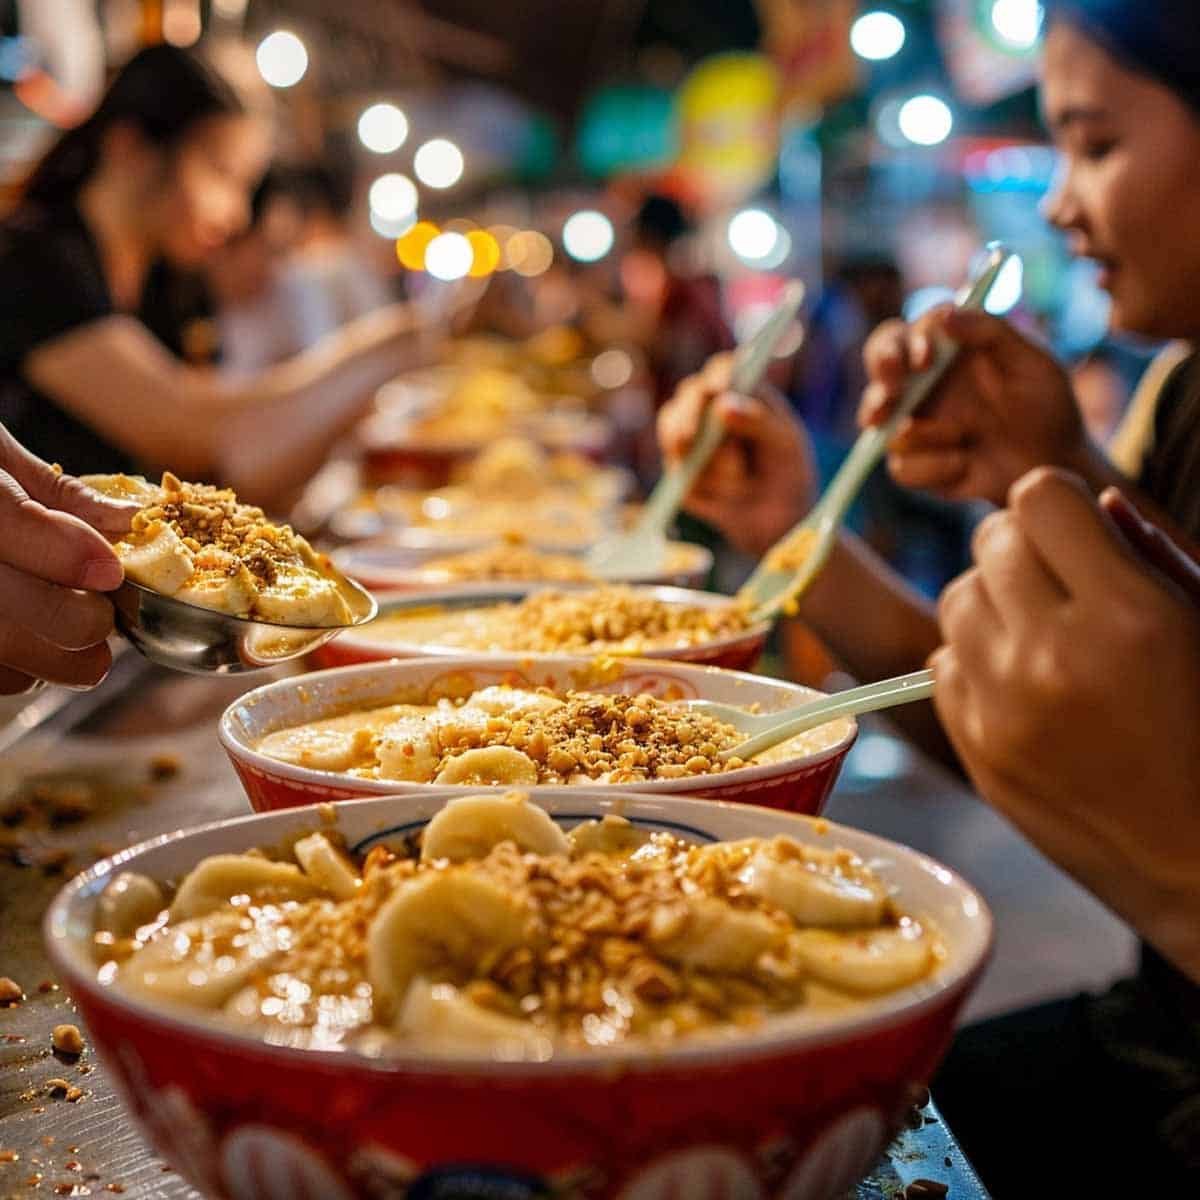 Bowl of Bananas in Coconut Milk dessert (Kluay Buat Chee) being served at a night market.